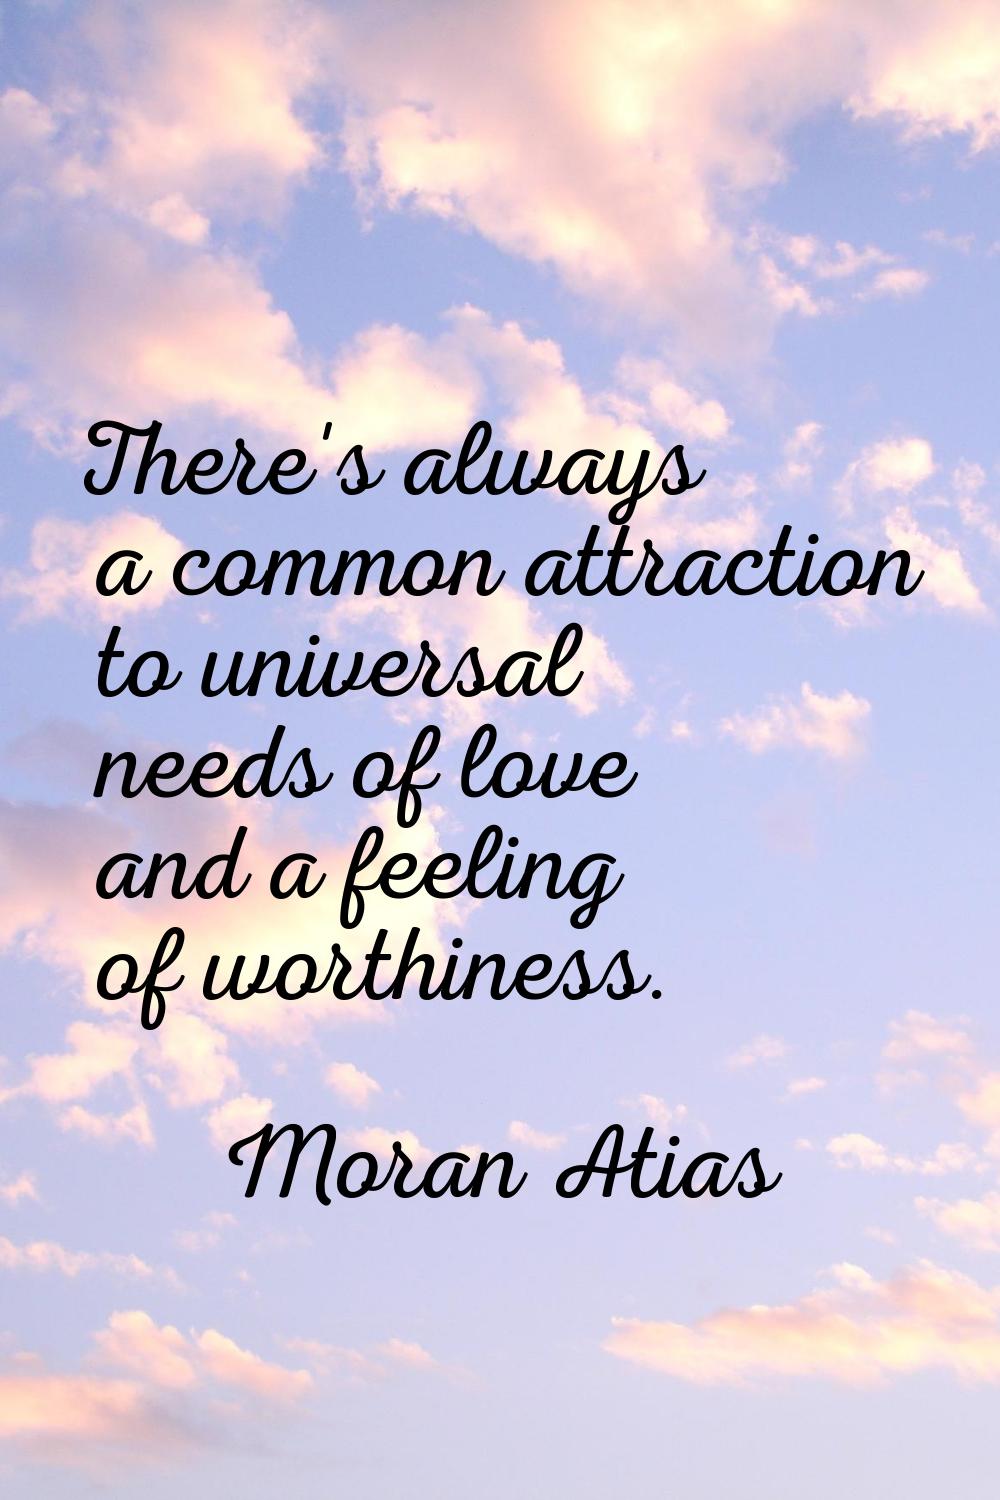 There's always a common attraction to universal needs of love and a feeling of worthiness.